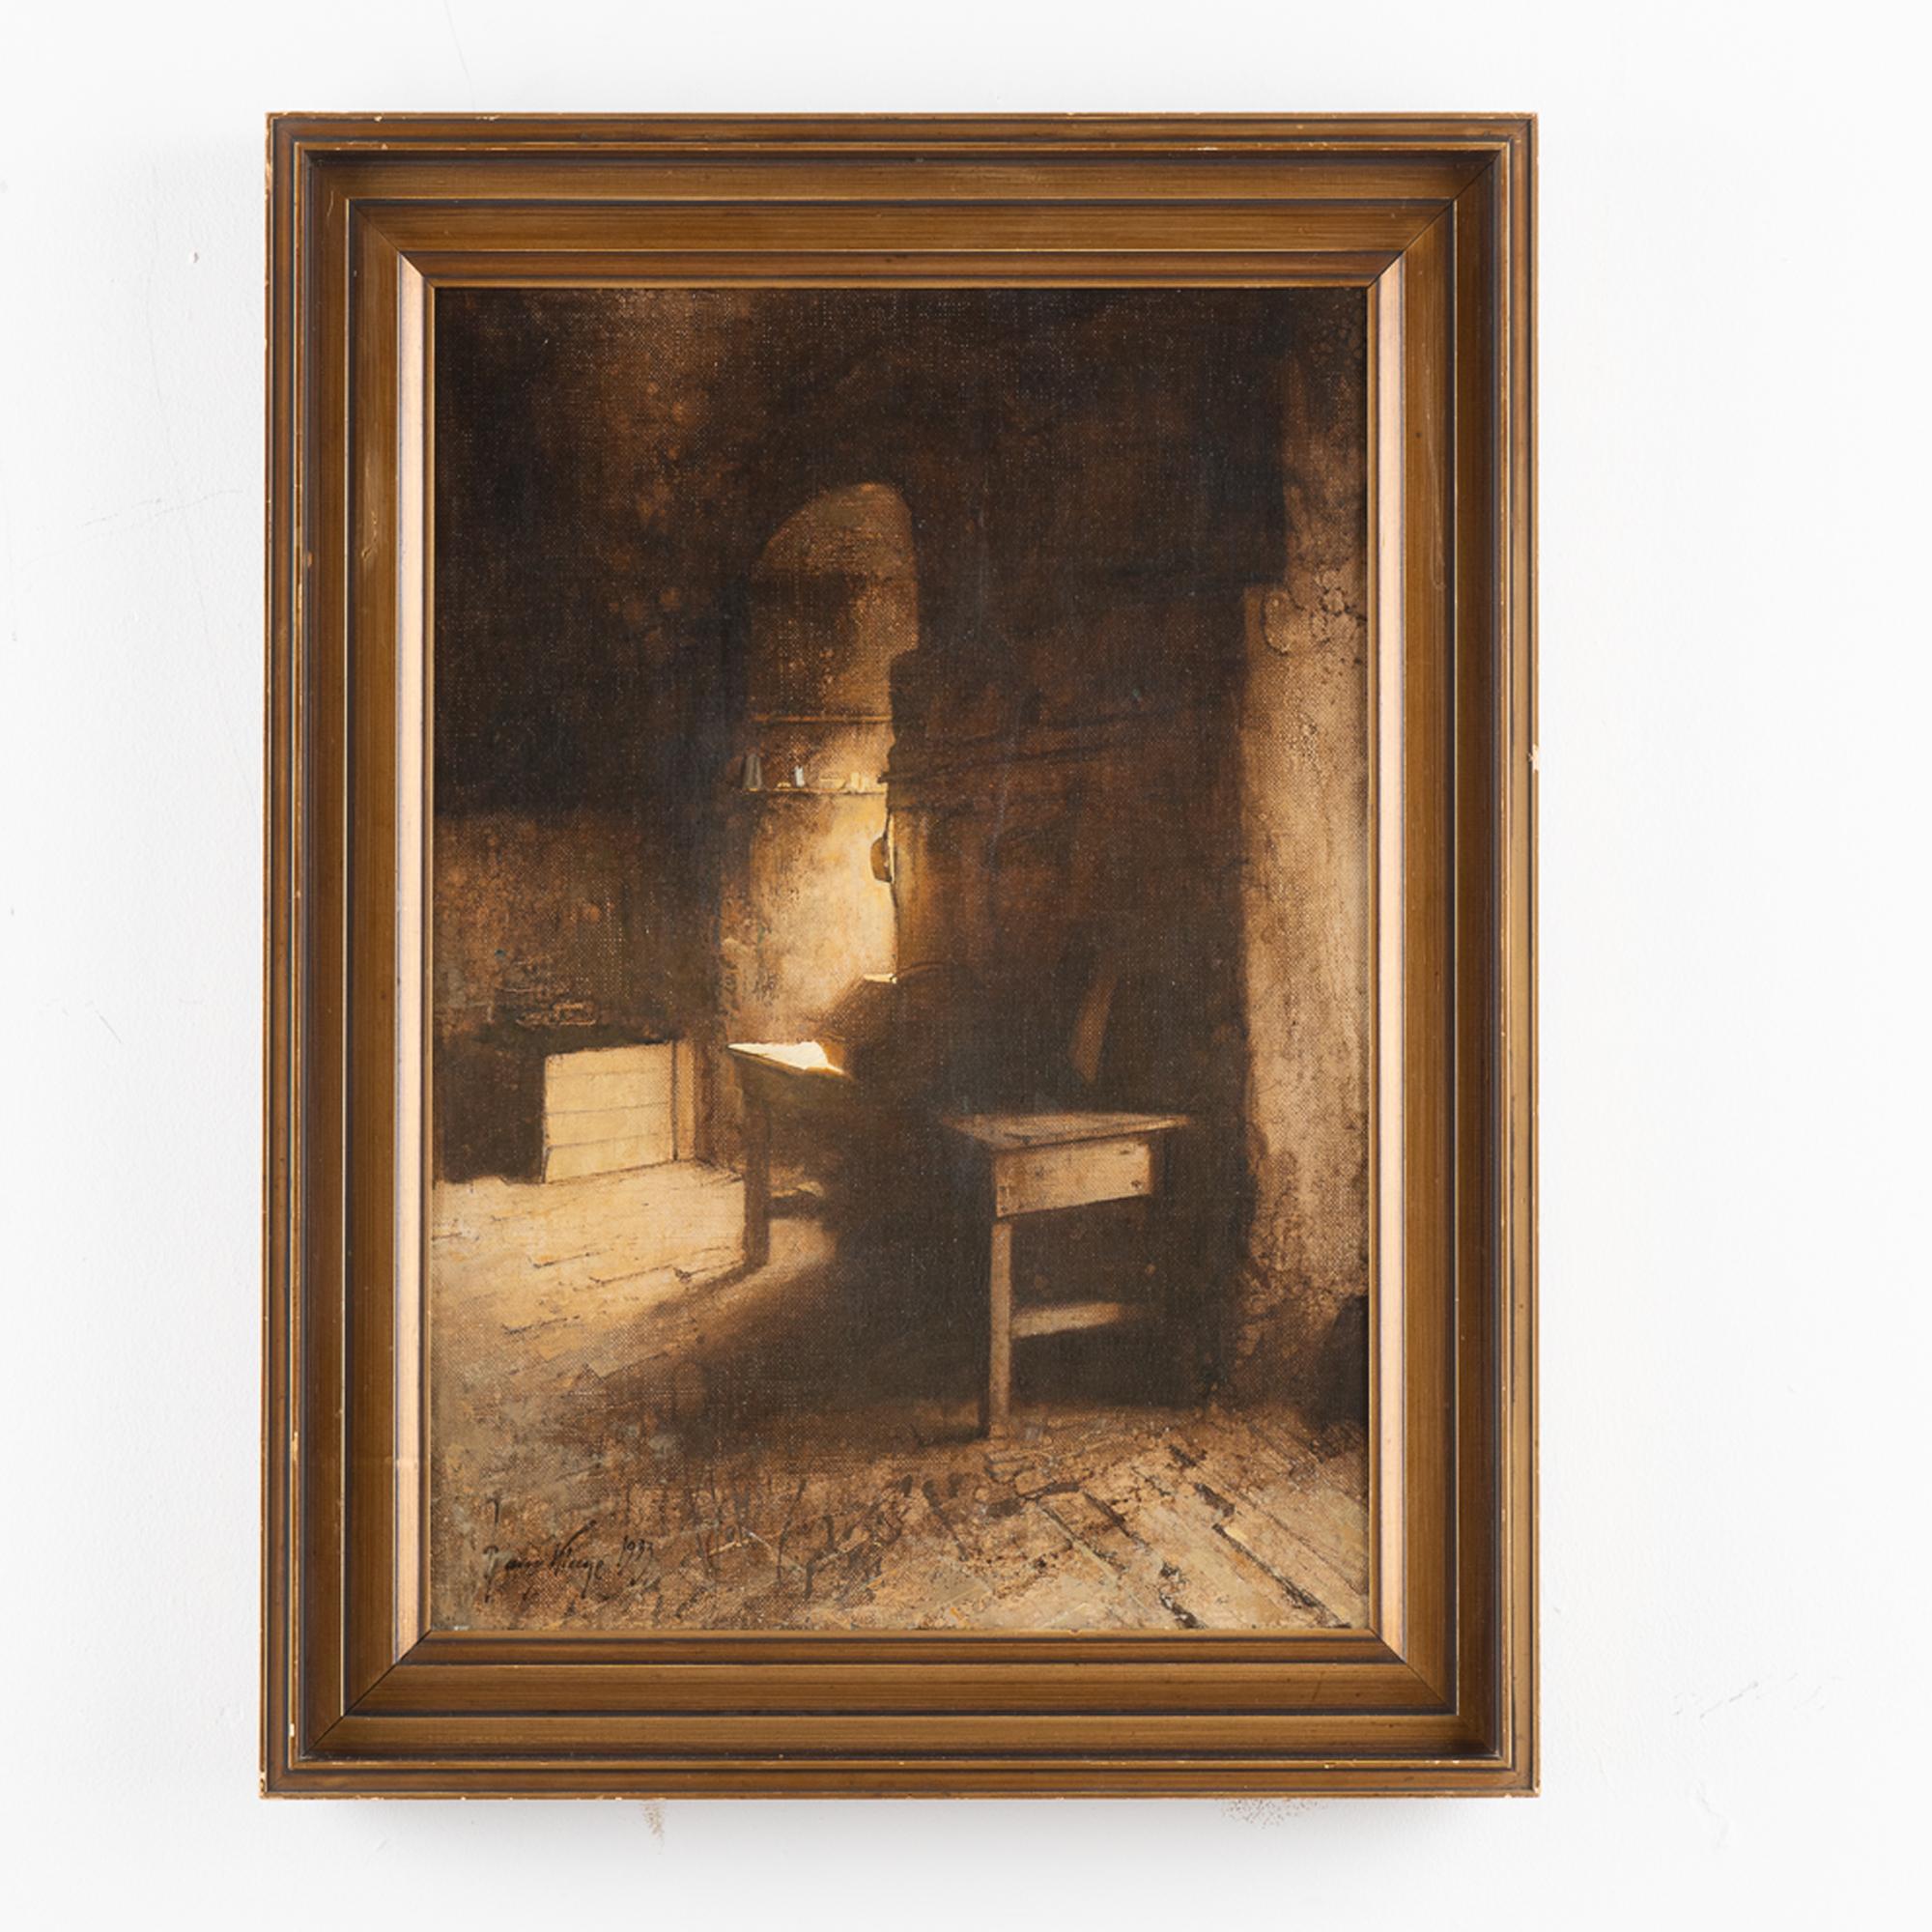 Original oil on canvas painting of an interior from a kitchen, with moody feel due to creative use of light and shadow by Harry Kluge.
Signed and dated Harry Kluge 1933.
Condition:A few retouches. Canvias will benefit from a light surface cleaning